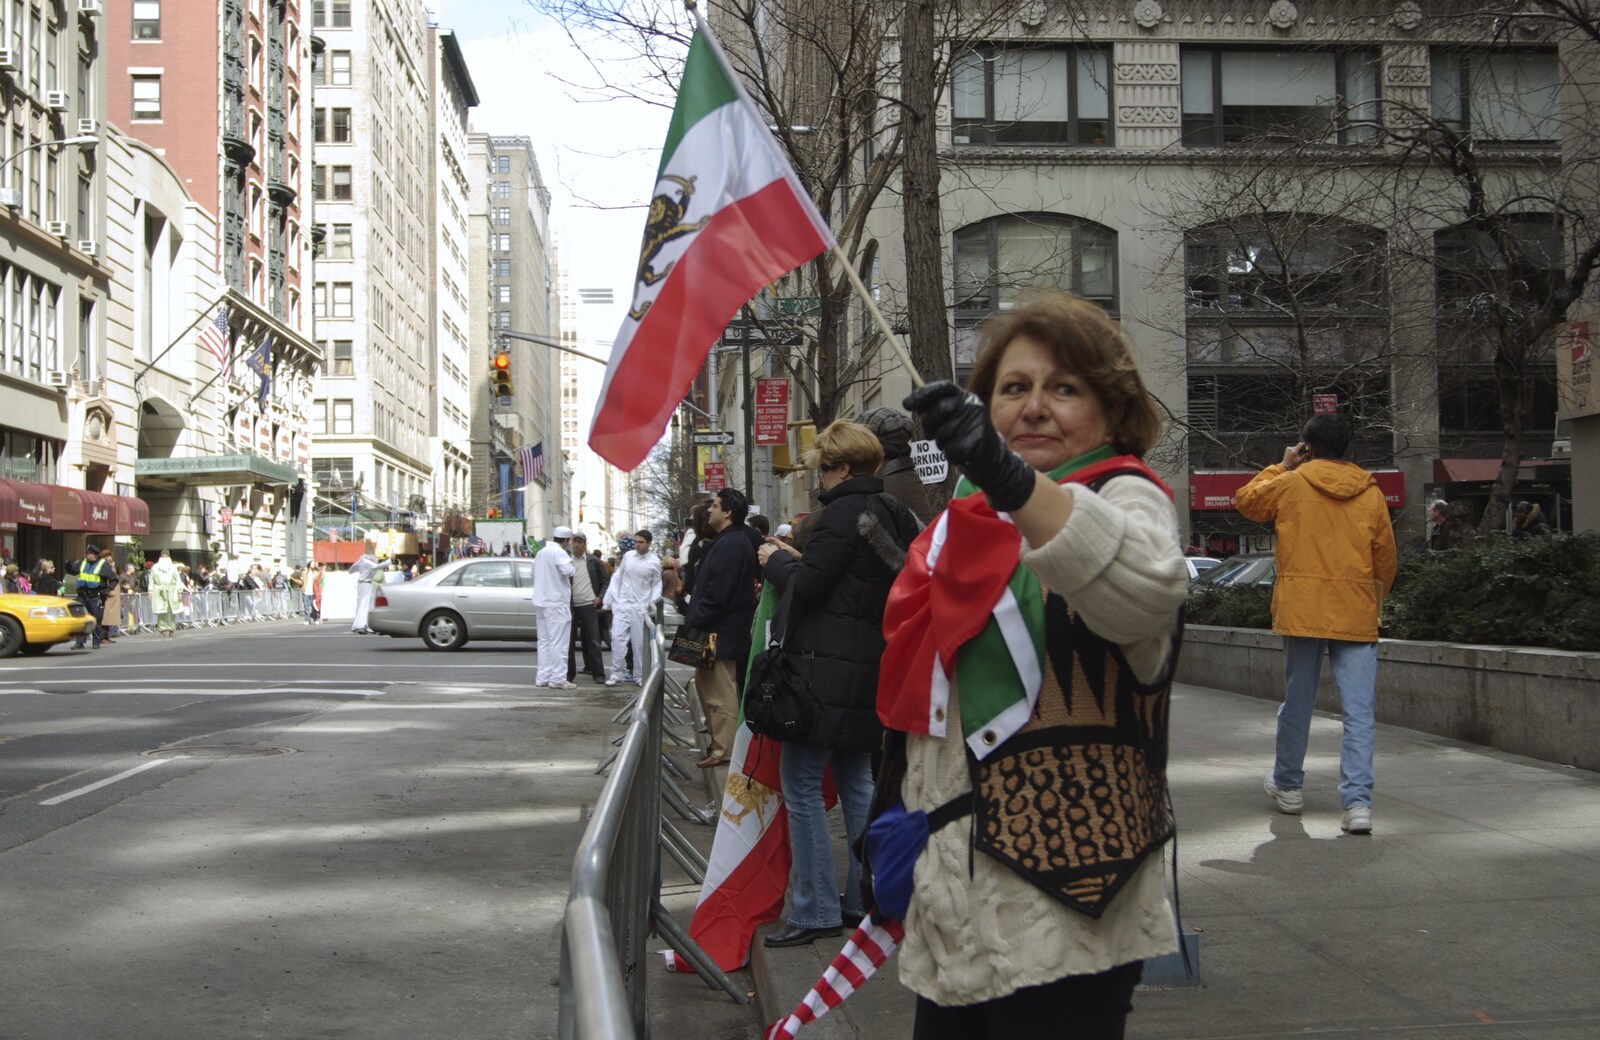 Persian Day Parade, Upper East Side and Midtown, New York, US - 25th March 2007: More flag waving